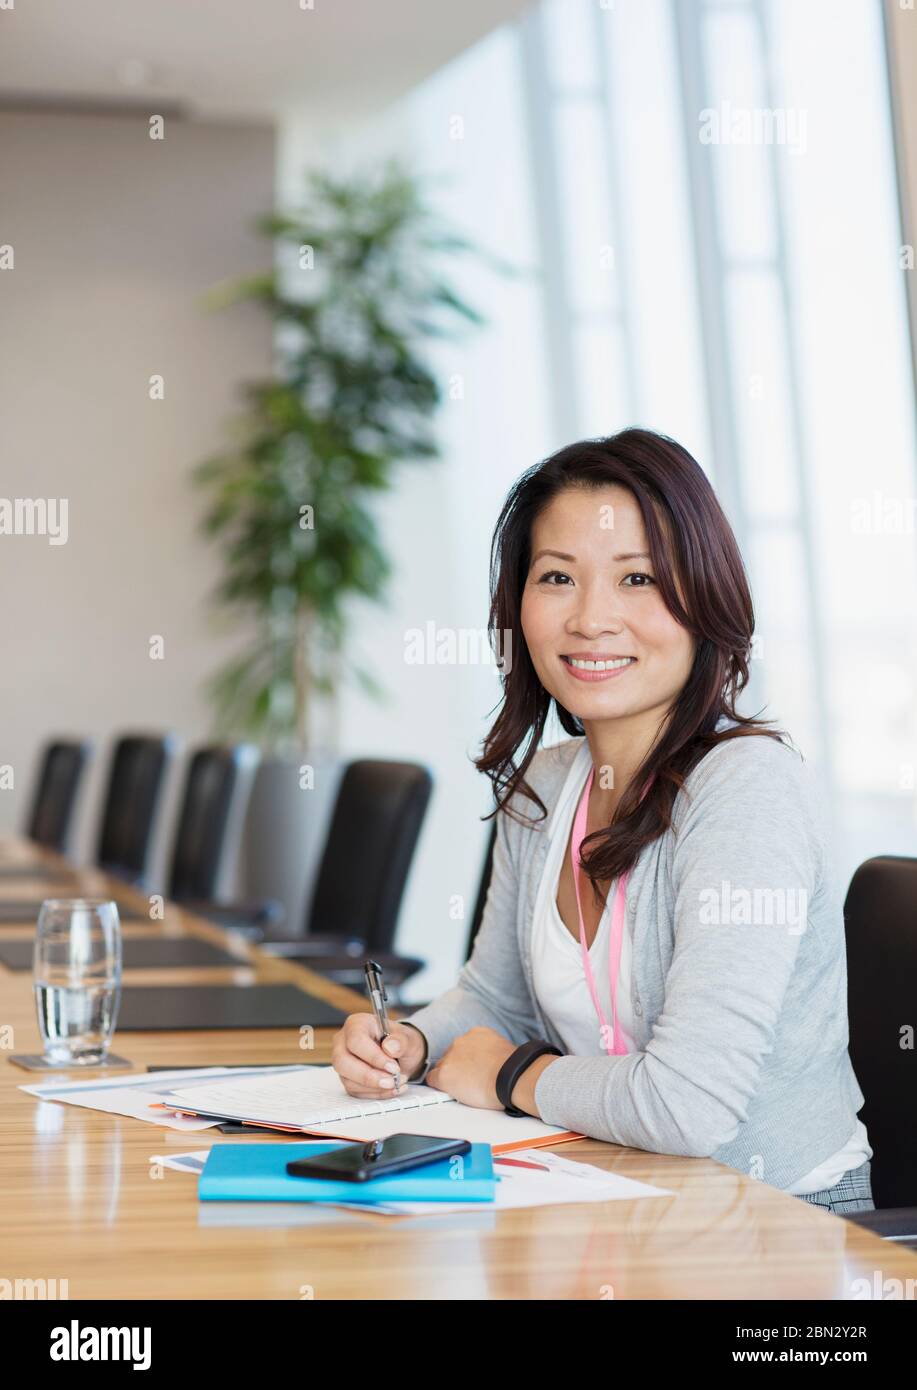 Portrait confident businesswoman working at conference table Stock Photo